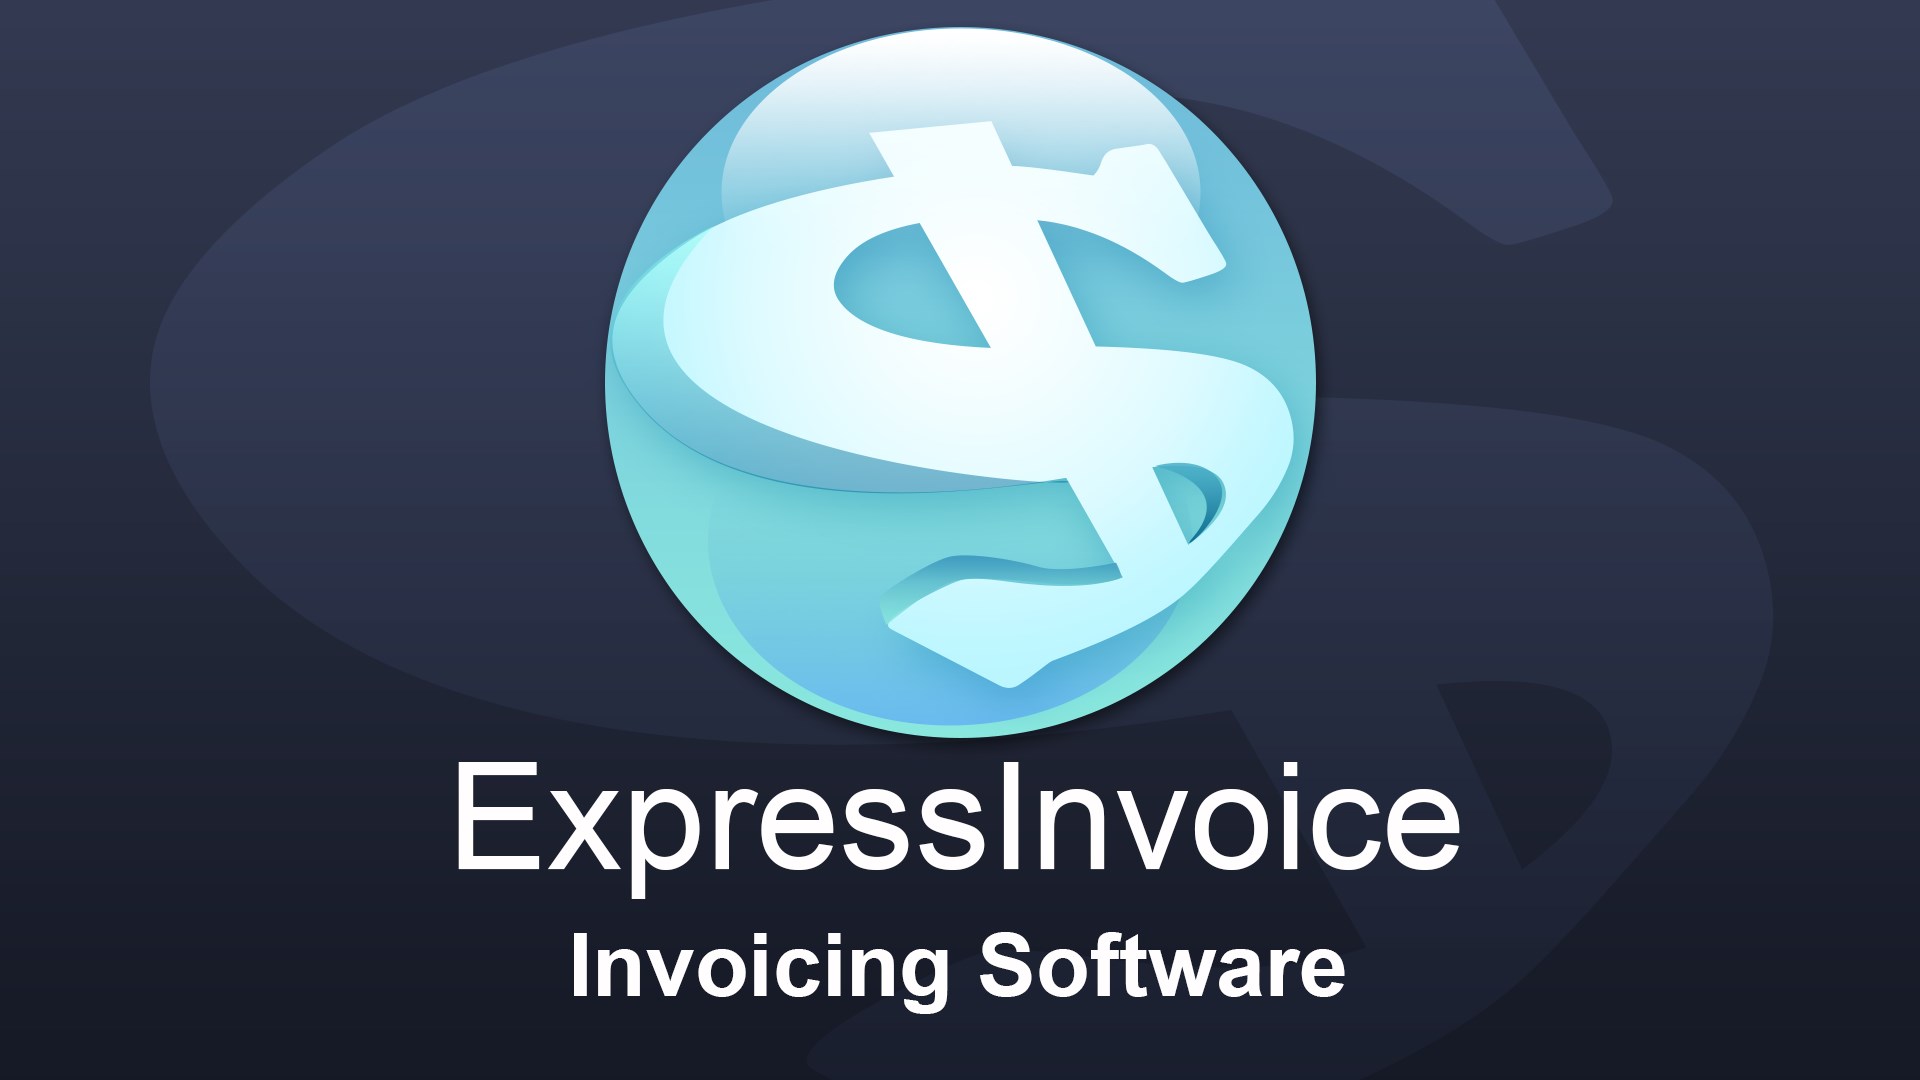 NCH: Express Invoice Invoicing Key 203.62$